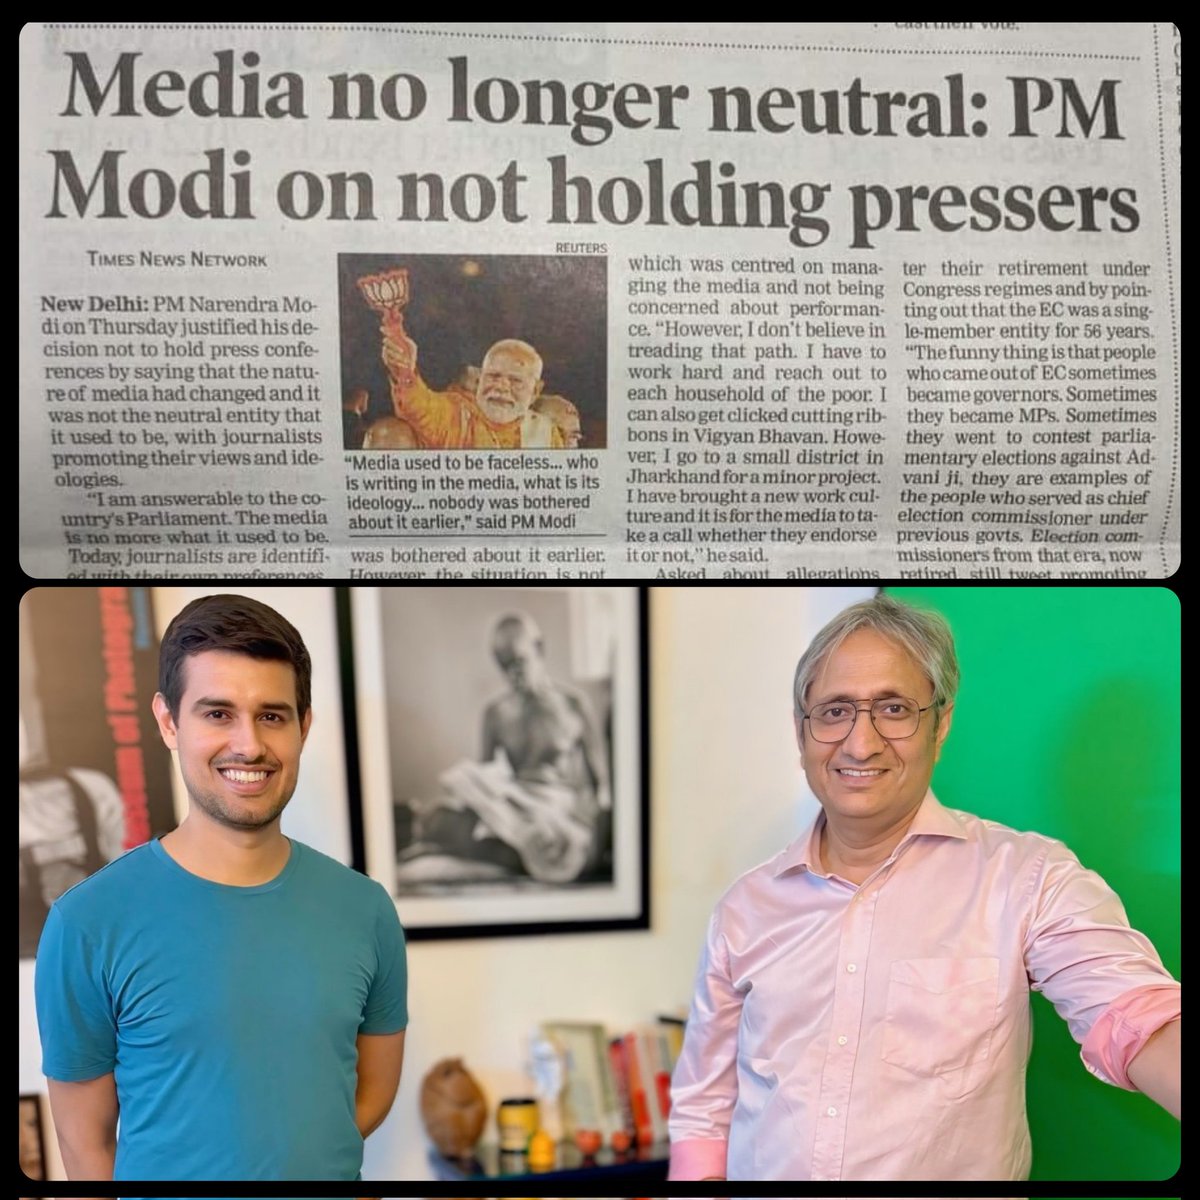 Since Media is no longer Neutral, Modiji should give an interview to these two Youtubers.